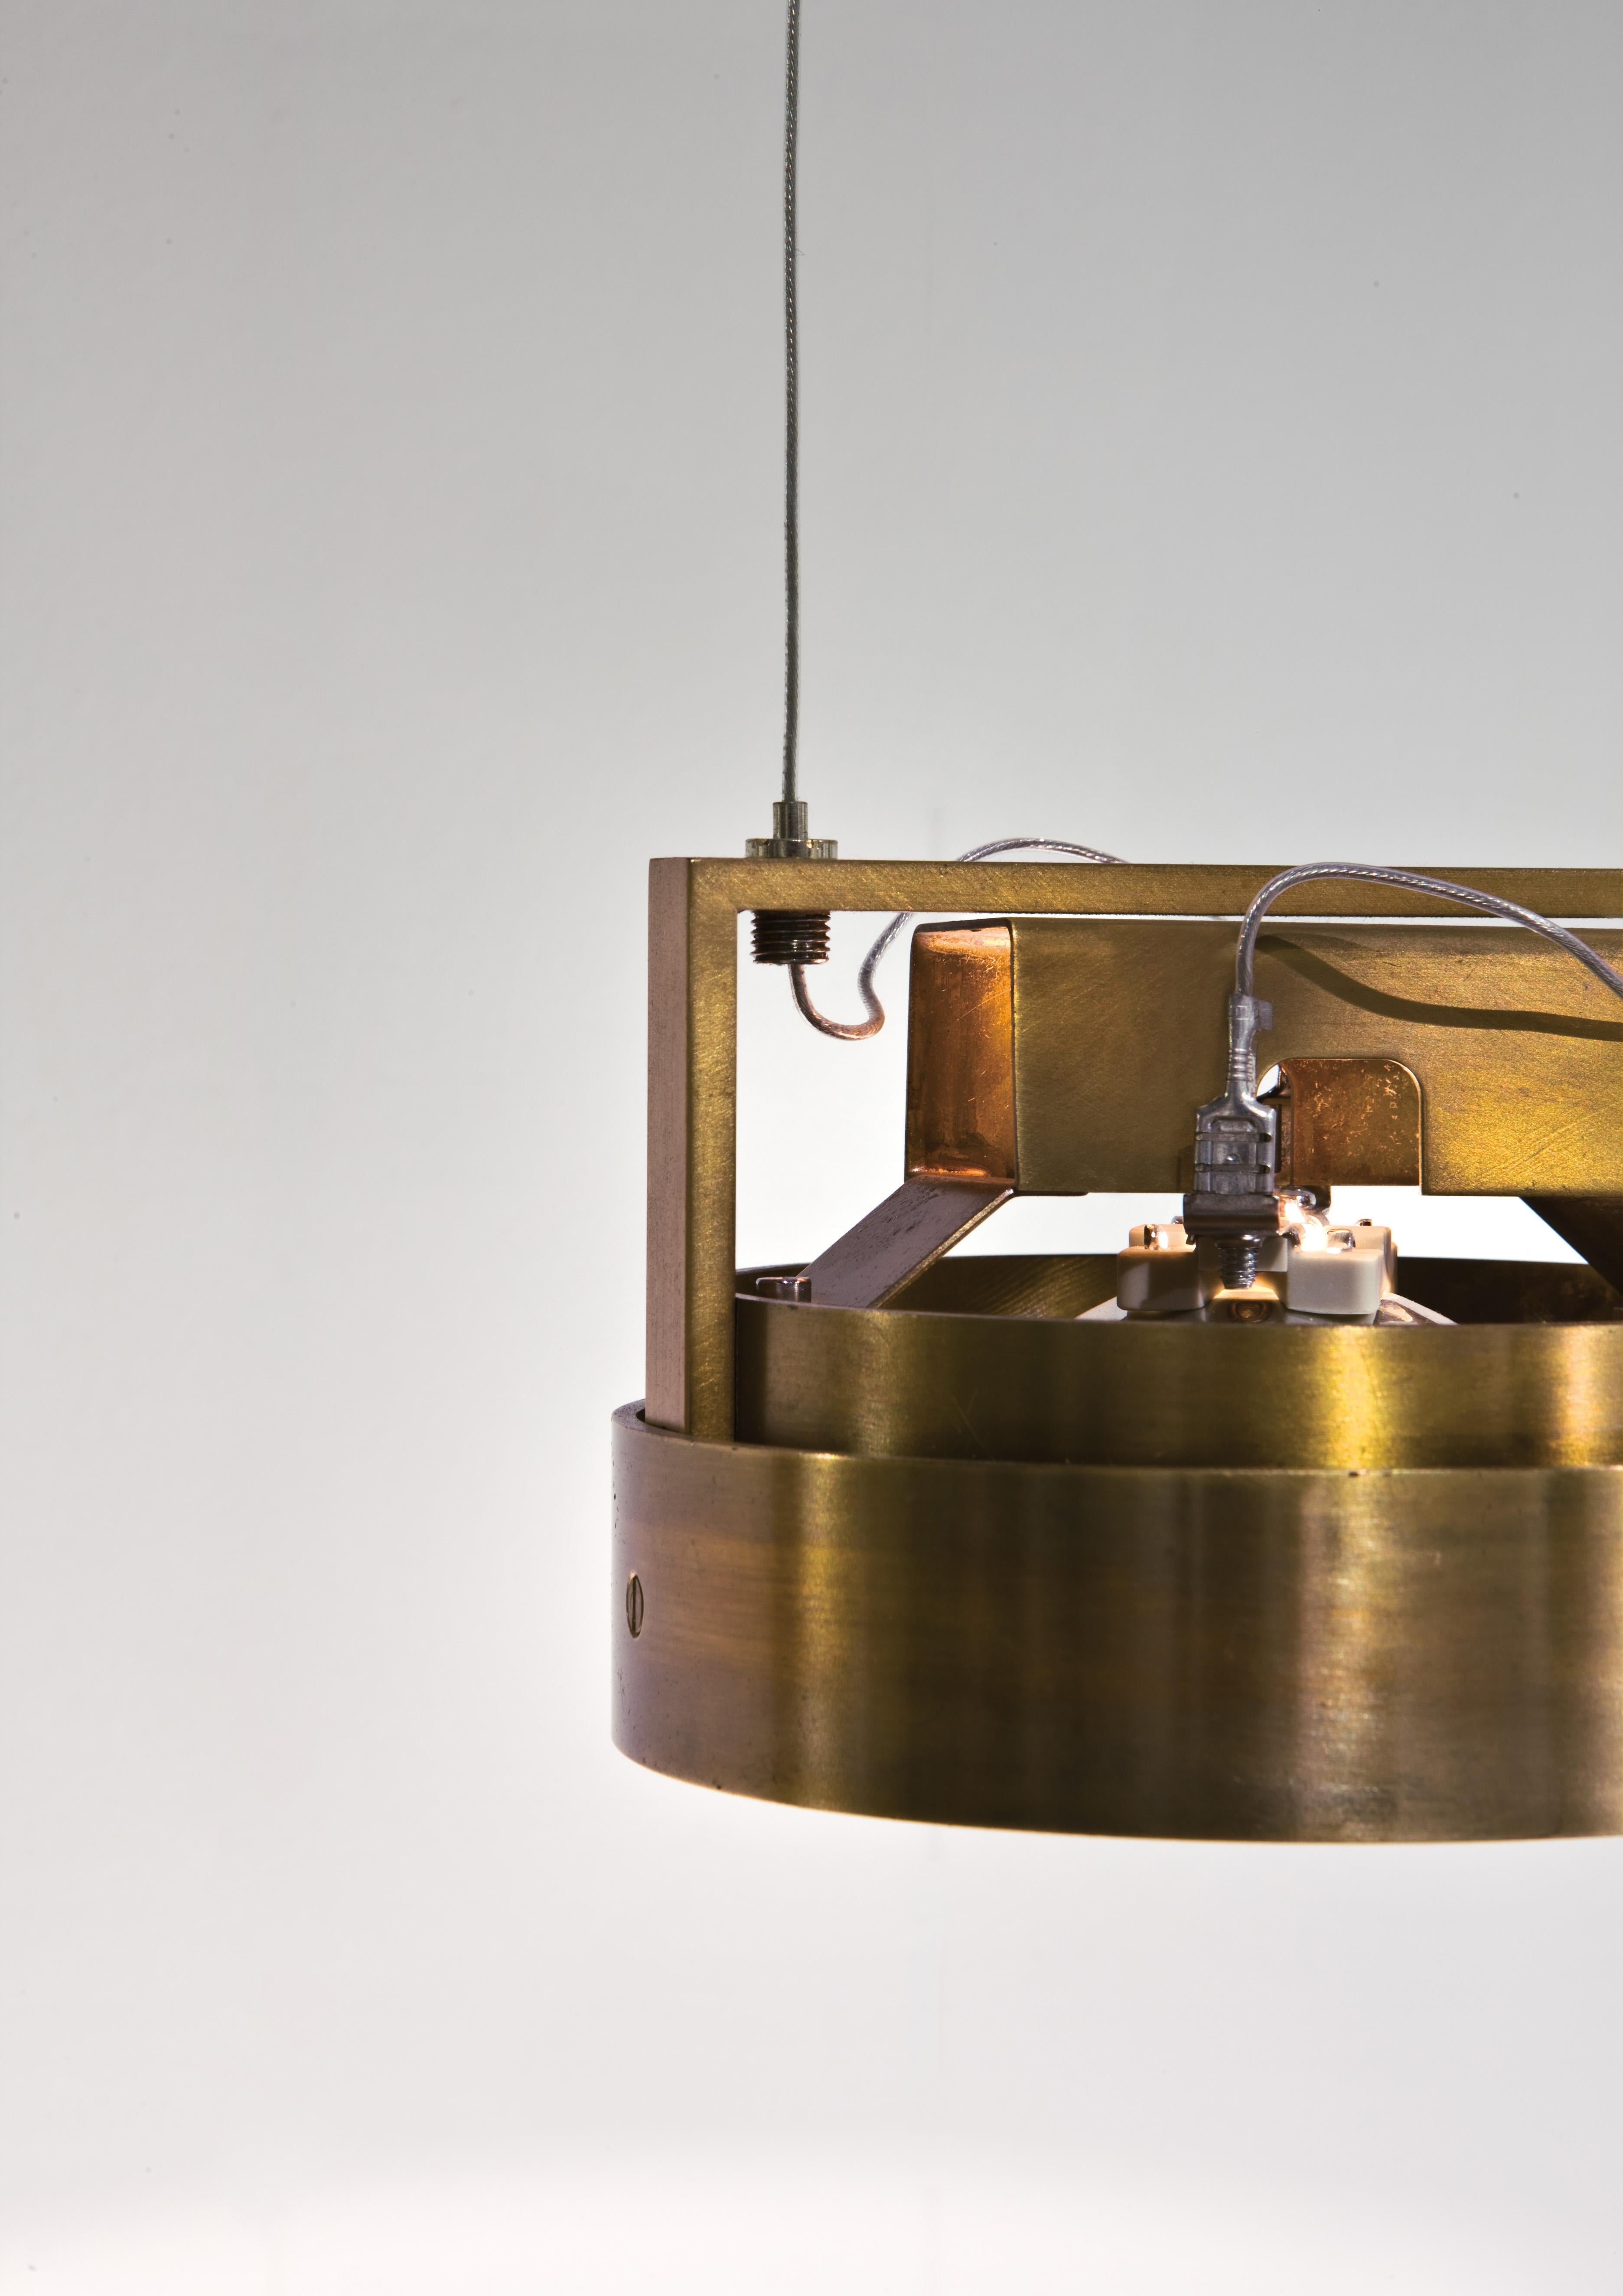 Adjustable LED hanging spotlight for ceiling fastening in light burnished brass.

FINISH:
Light burnished brass

The sophisticated design and the choice of the finest materials are the distinctive elements of our Lamps. Particular attention is paid